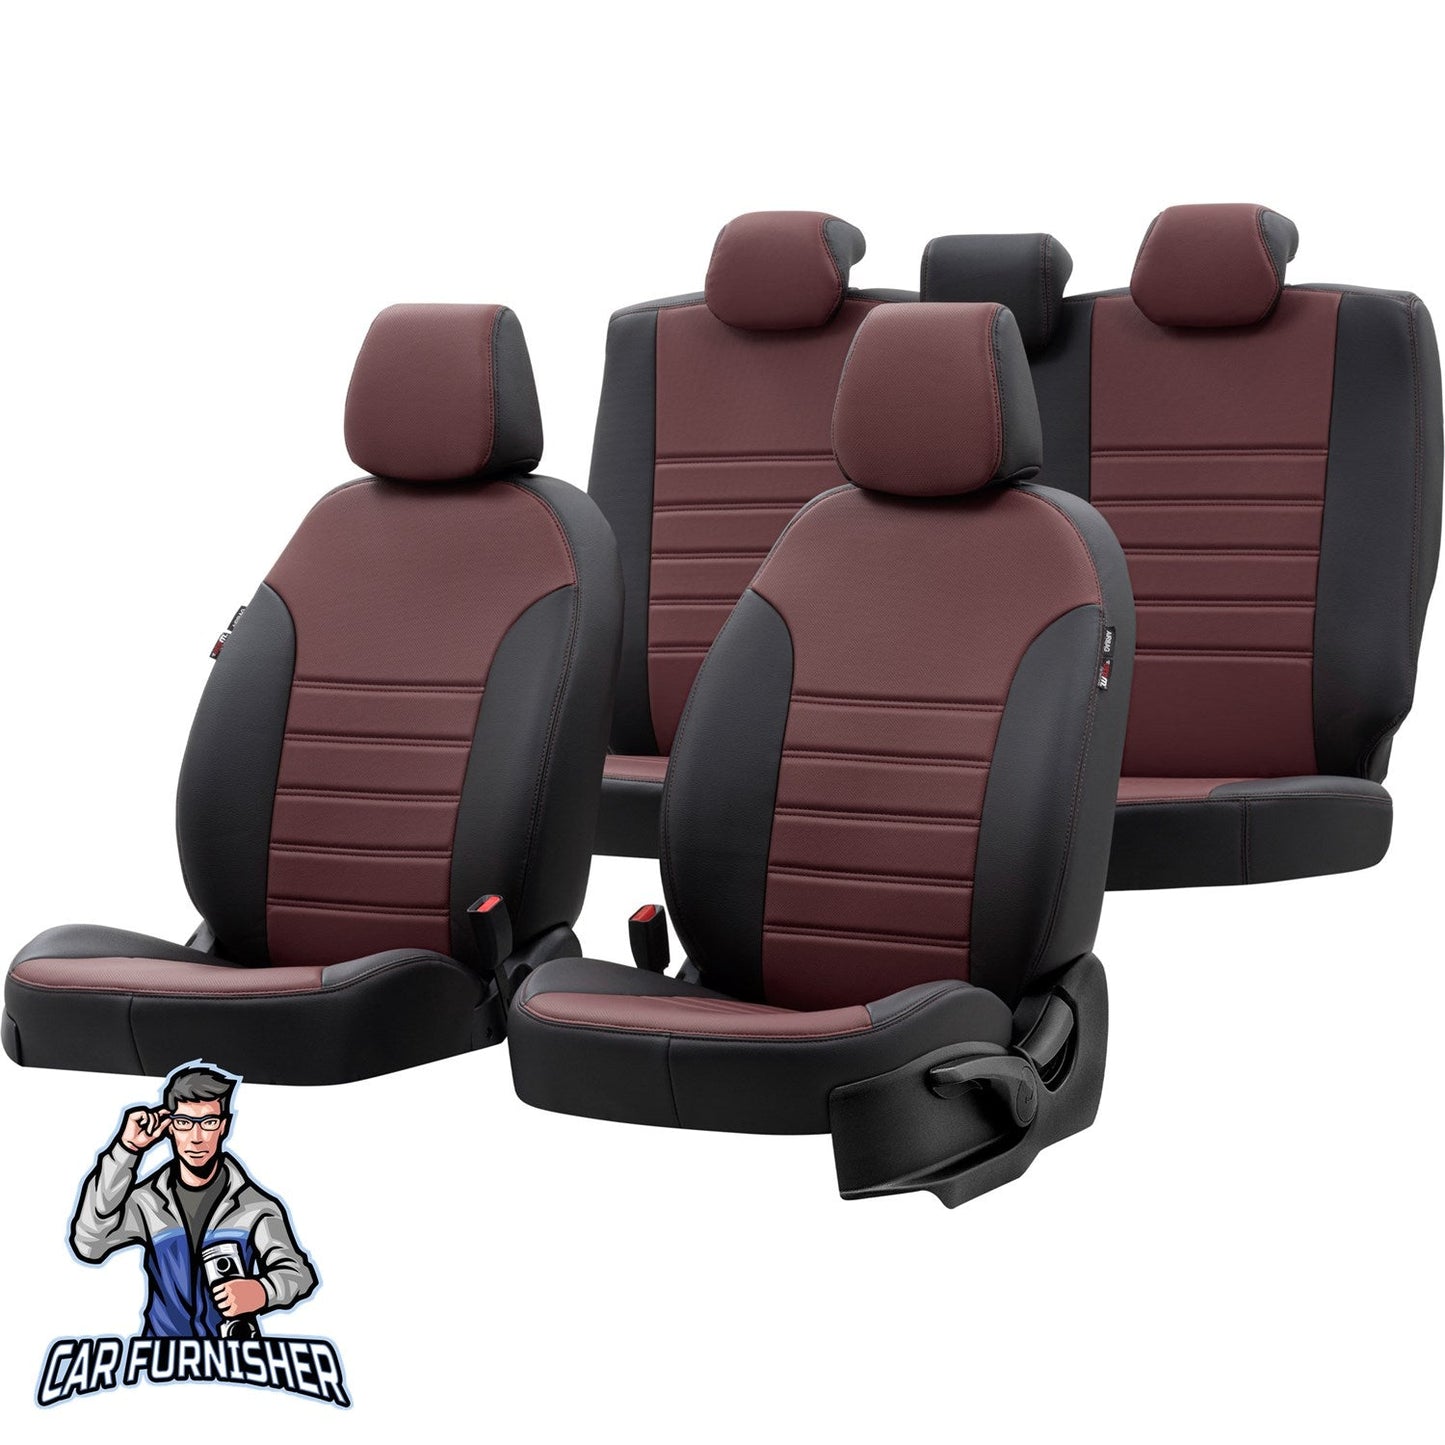 Nissan Qashqai Seat Covers Istanbul Leather Design Burgundy Leather